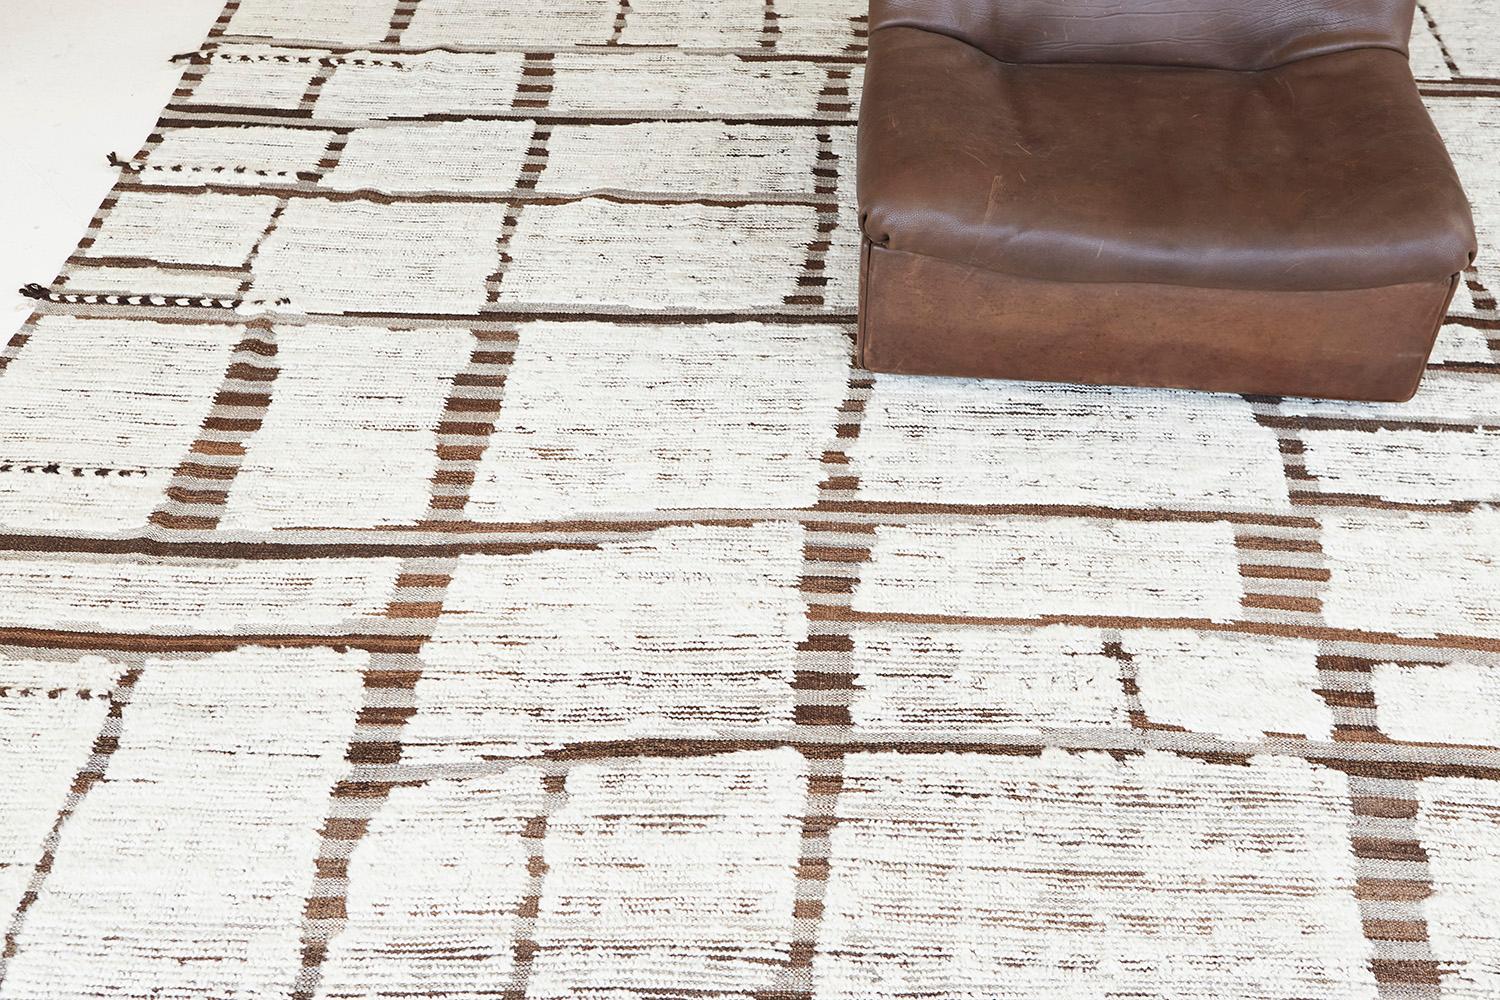 Maziere' is a handwoven wool piece with unique design elements that mirror roman masonry. This luxurious striped brown and cedar pile weave and ivory shag make for the perfect contemporary. Maziere is designed in Los Angeles for the modern design